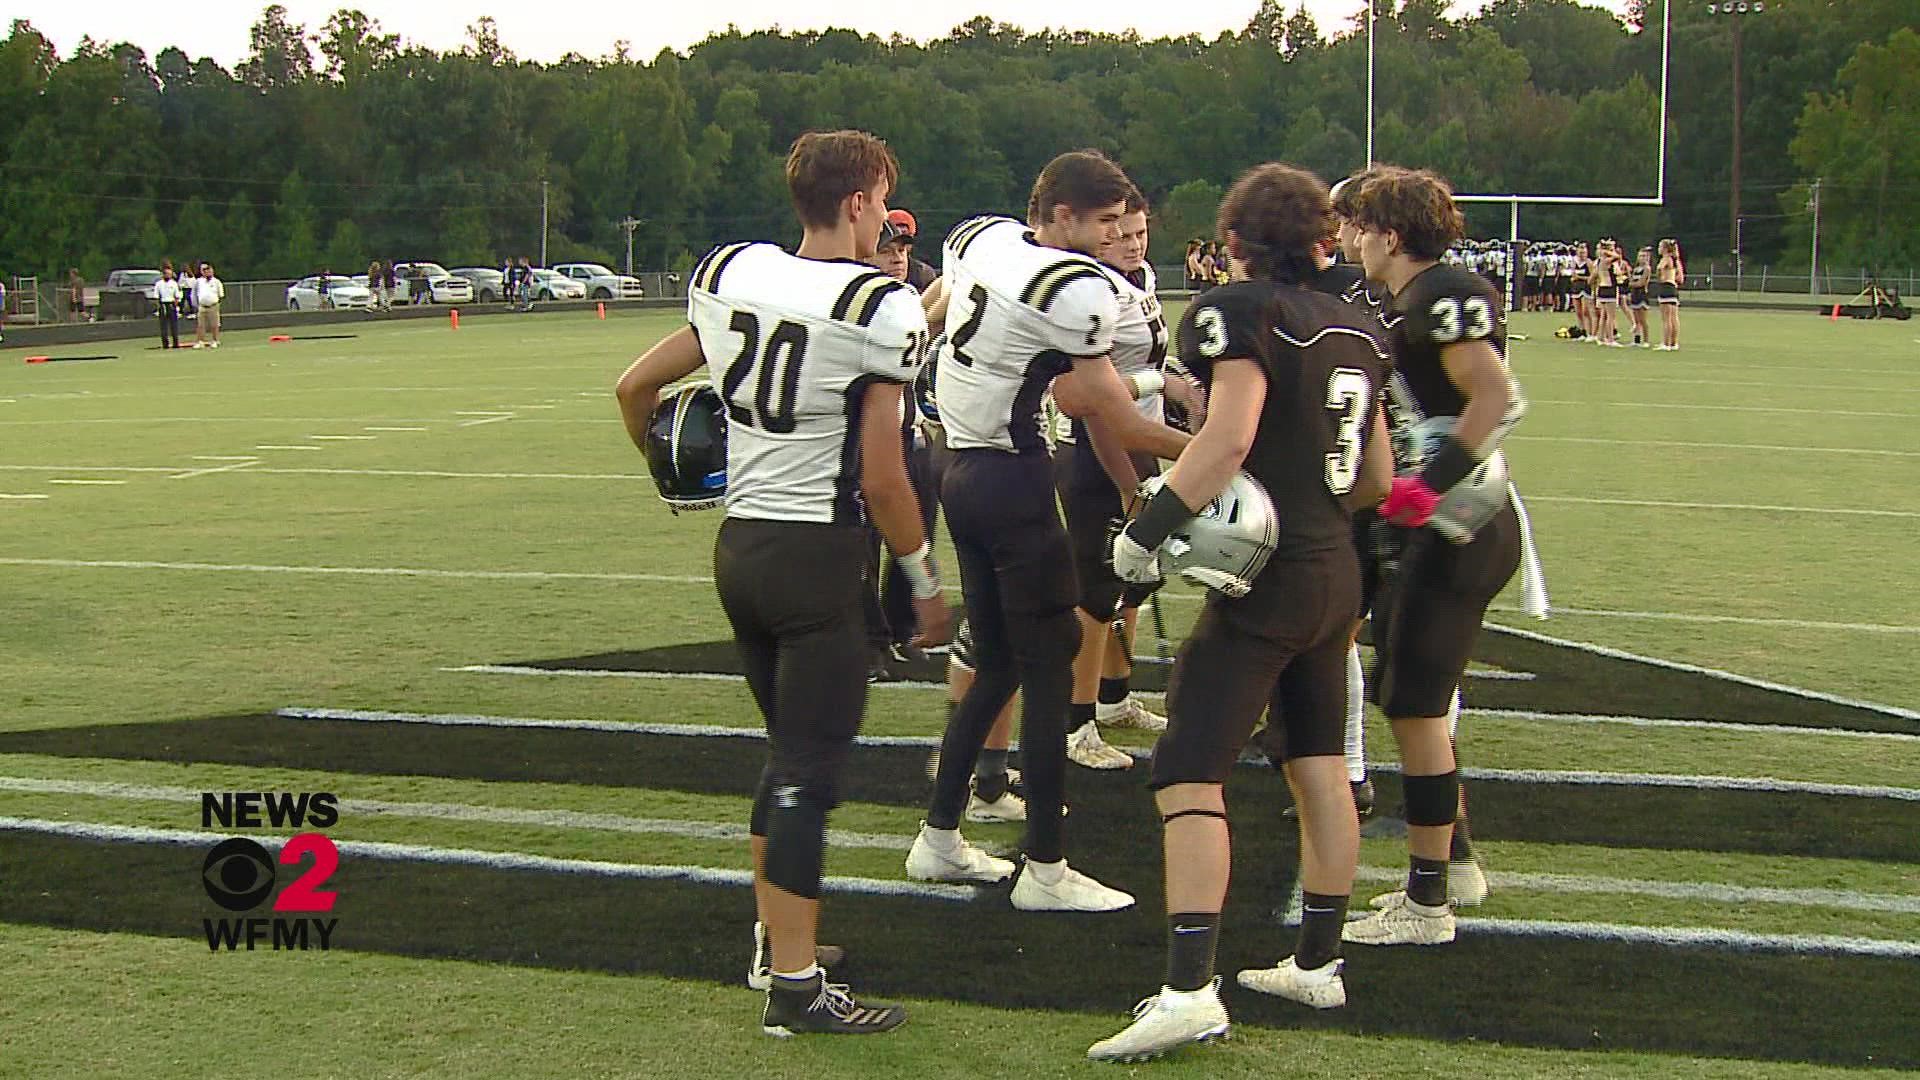 Ledford gets the 38-0 win and is now 3-0 on the season